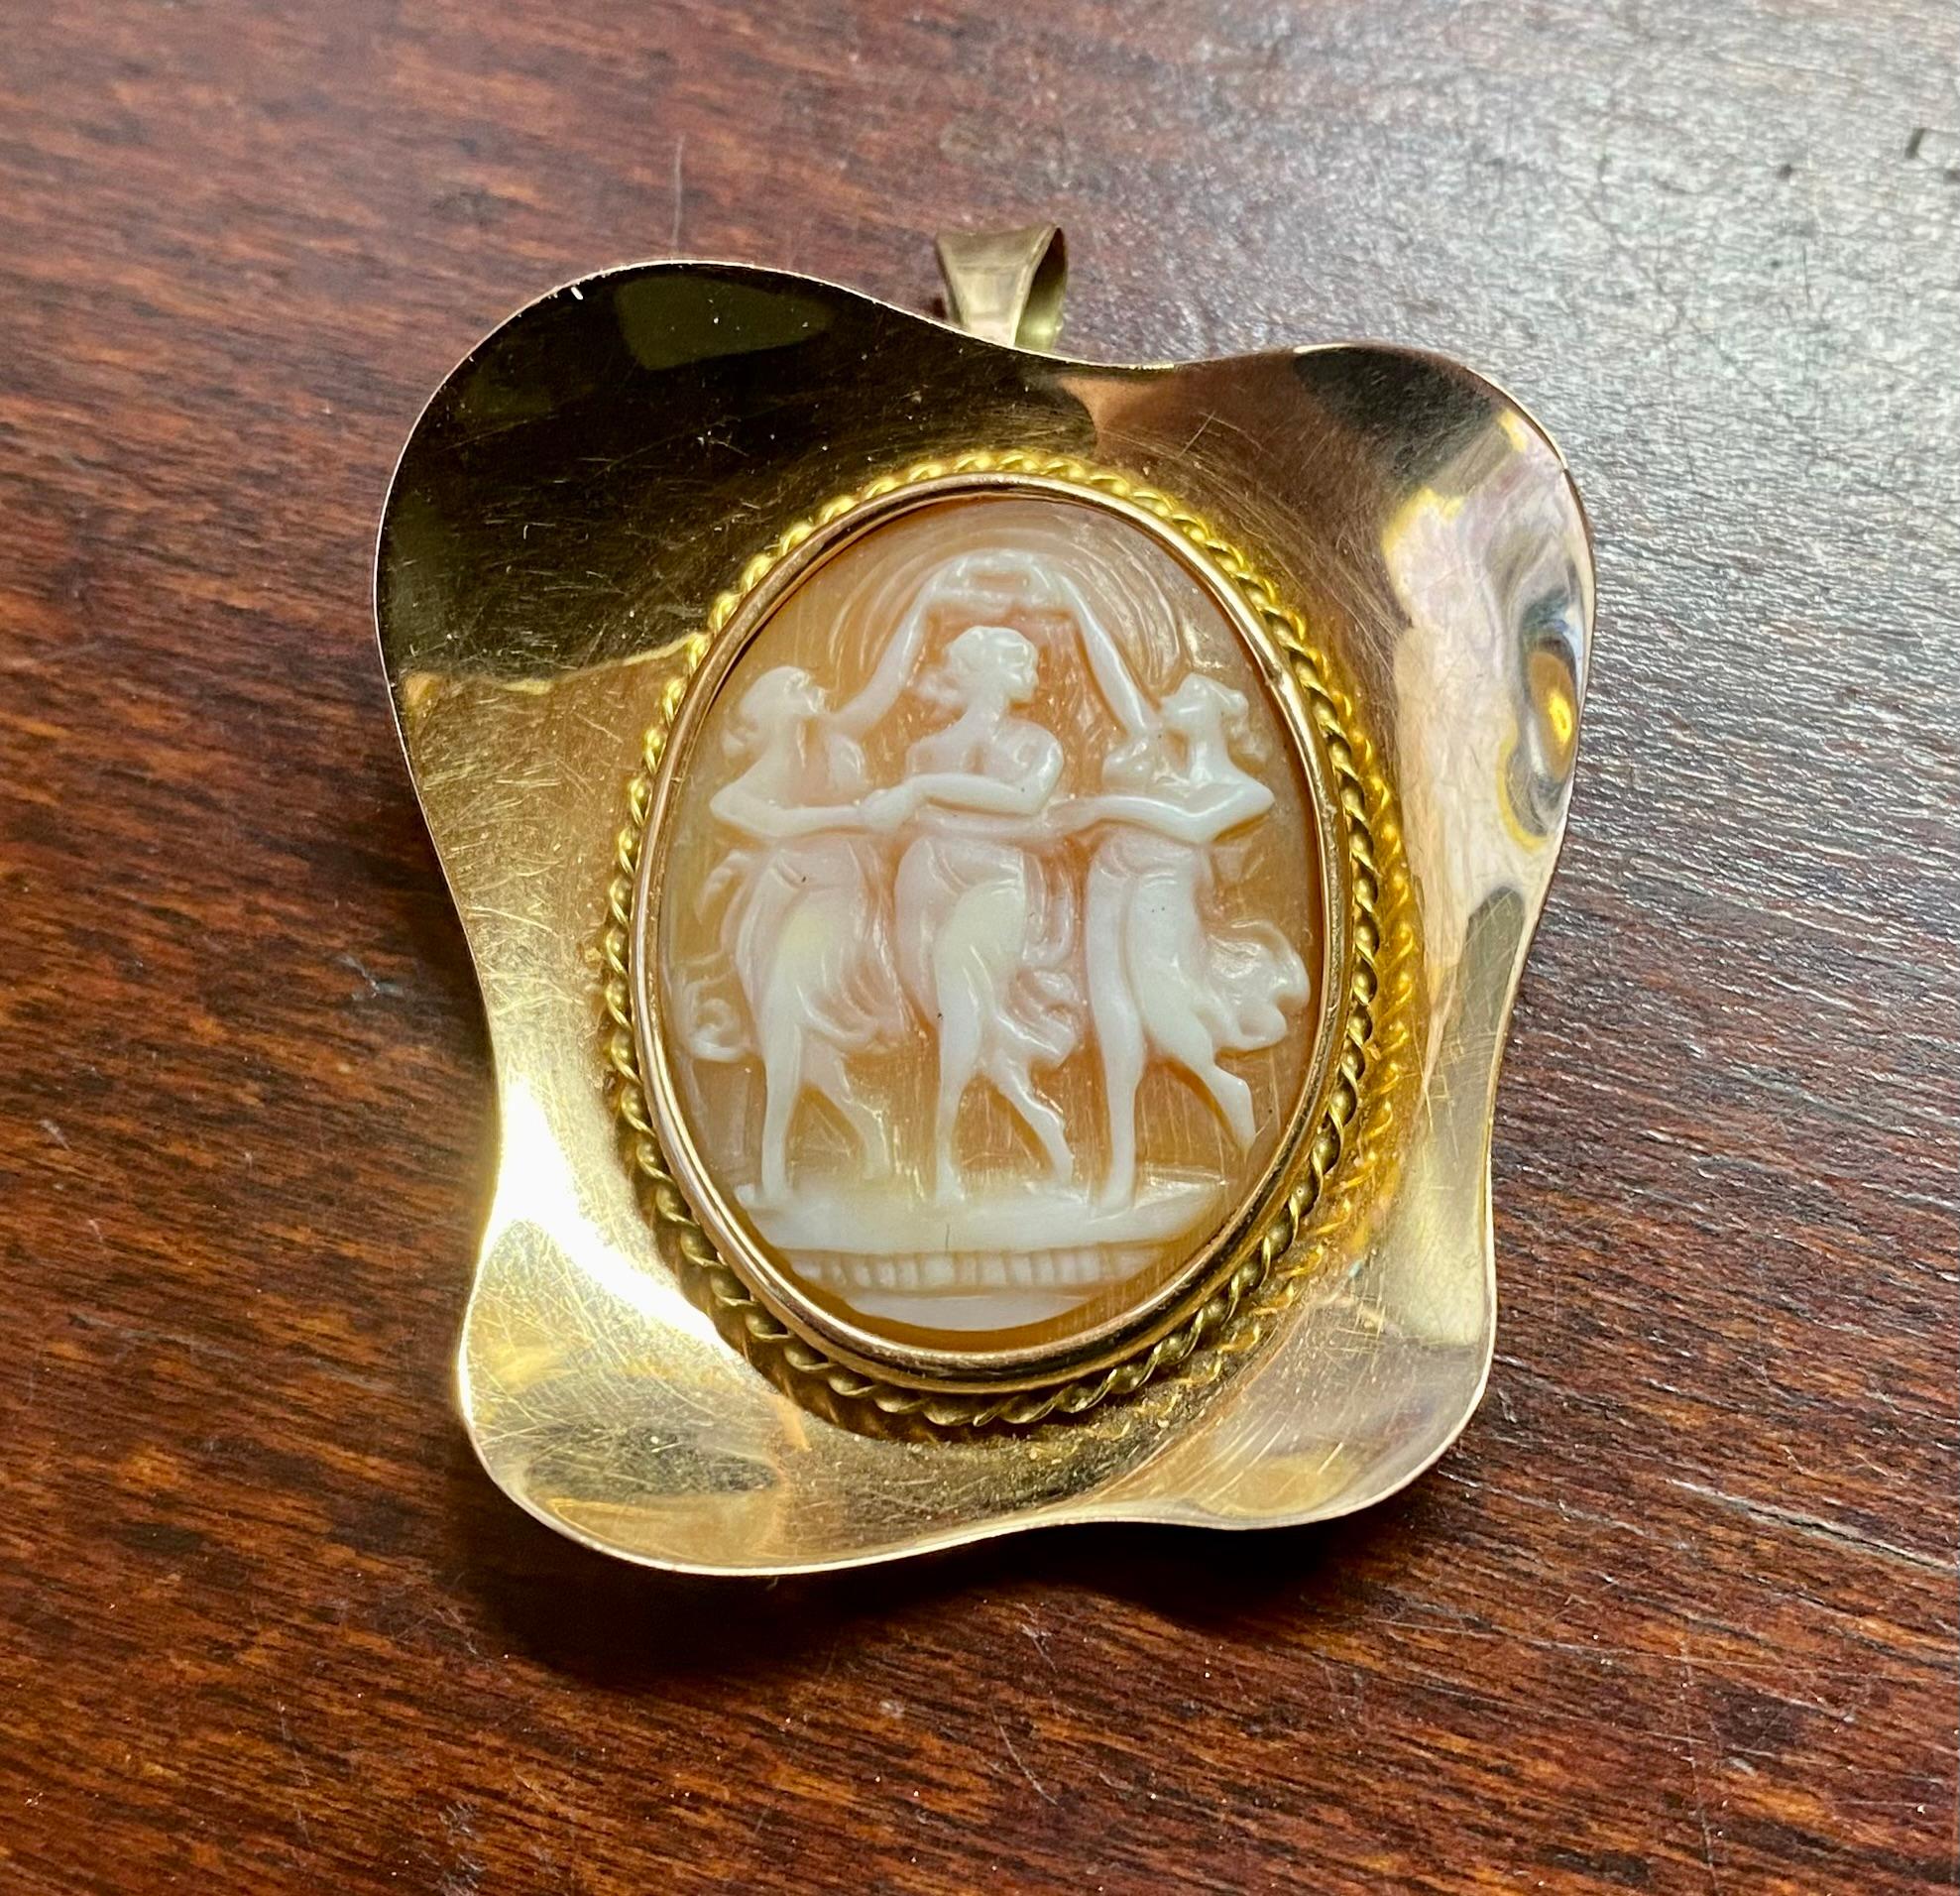 14kt Gold and Cameo Pendant/Brooch 1953
Gold Stamp Helsinki Finland.
Author Unknown.
Well done.
Eva Gyldén made these in Finland at that time
(Finland, year of birth 1885) but I don't know if it was made by him.
6,5g Weight
